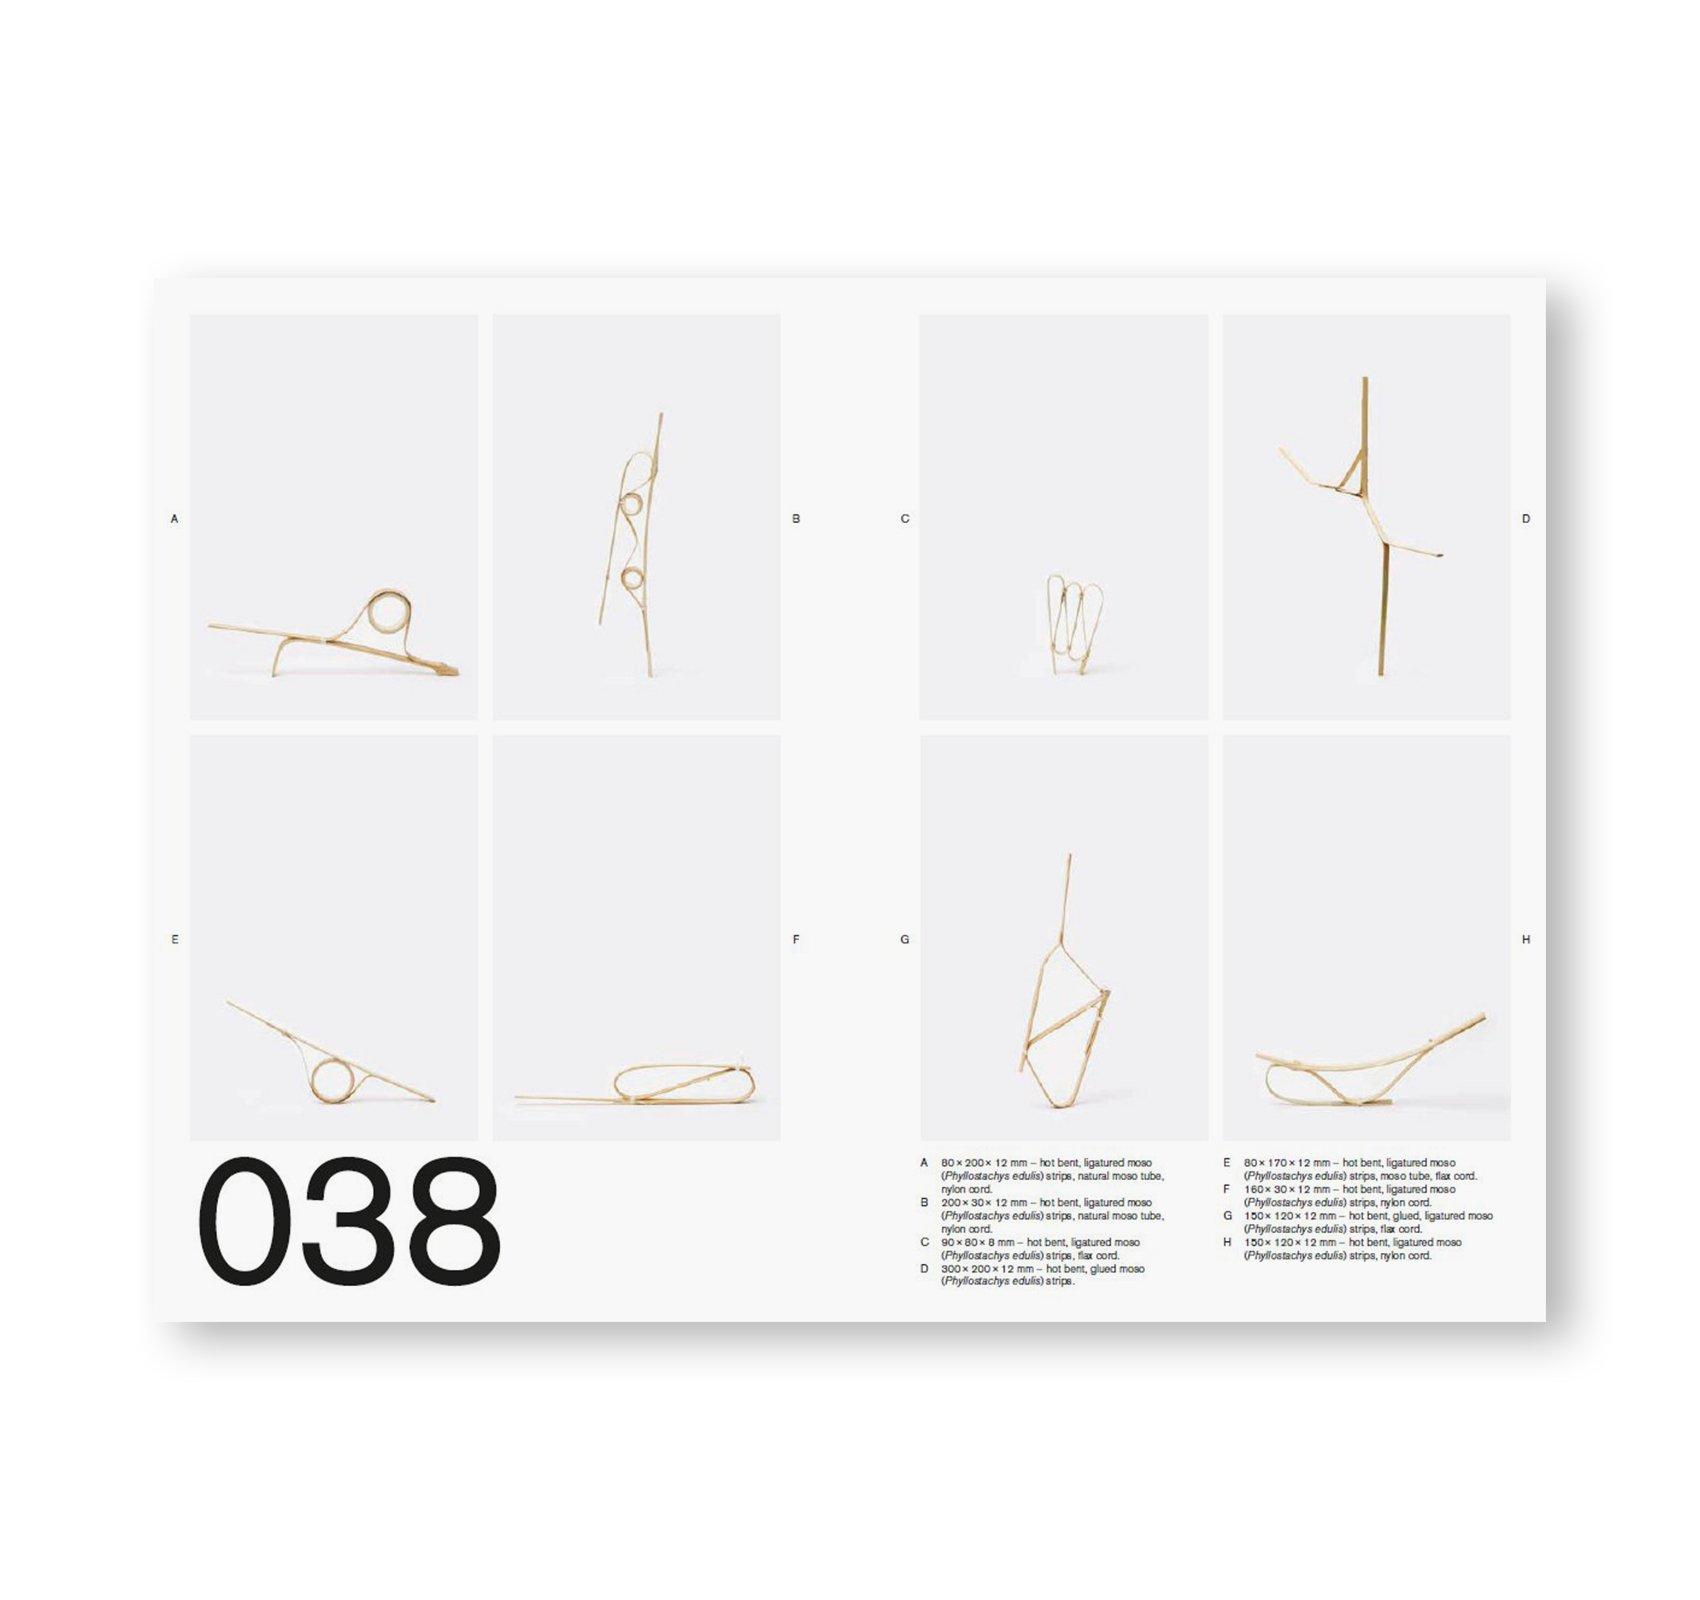 FUTURE PROOF? - ON GOING RESEARCH 2015-2020 by Samy Rio & Catherine Geel　作品集